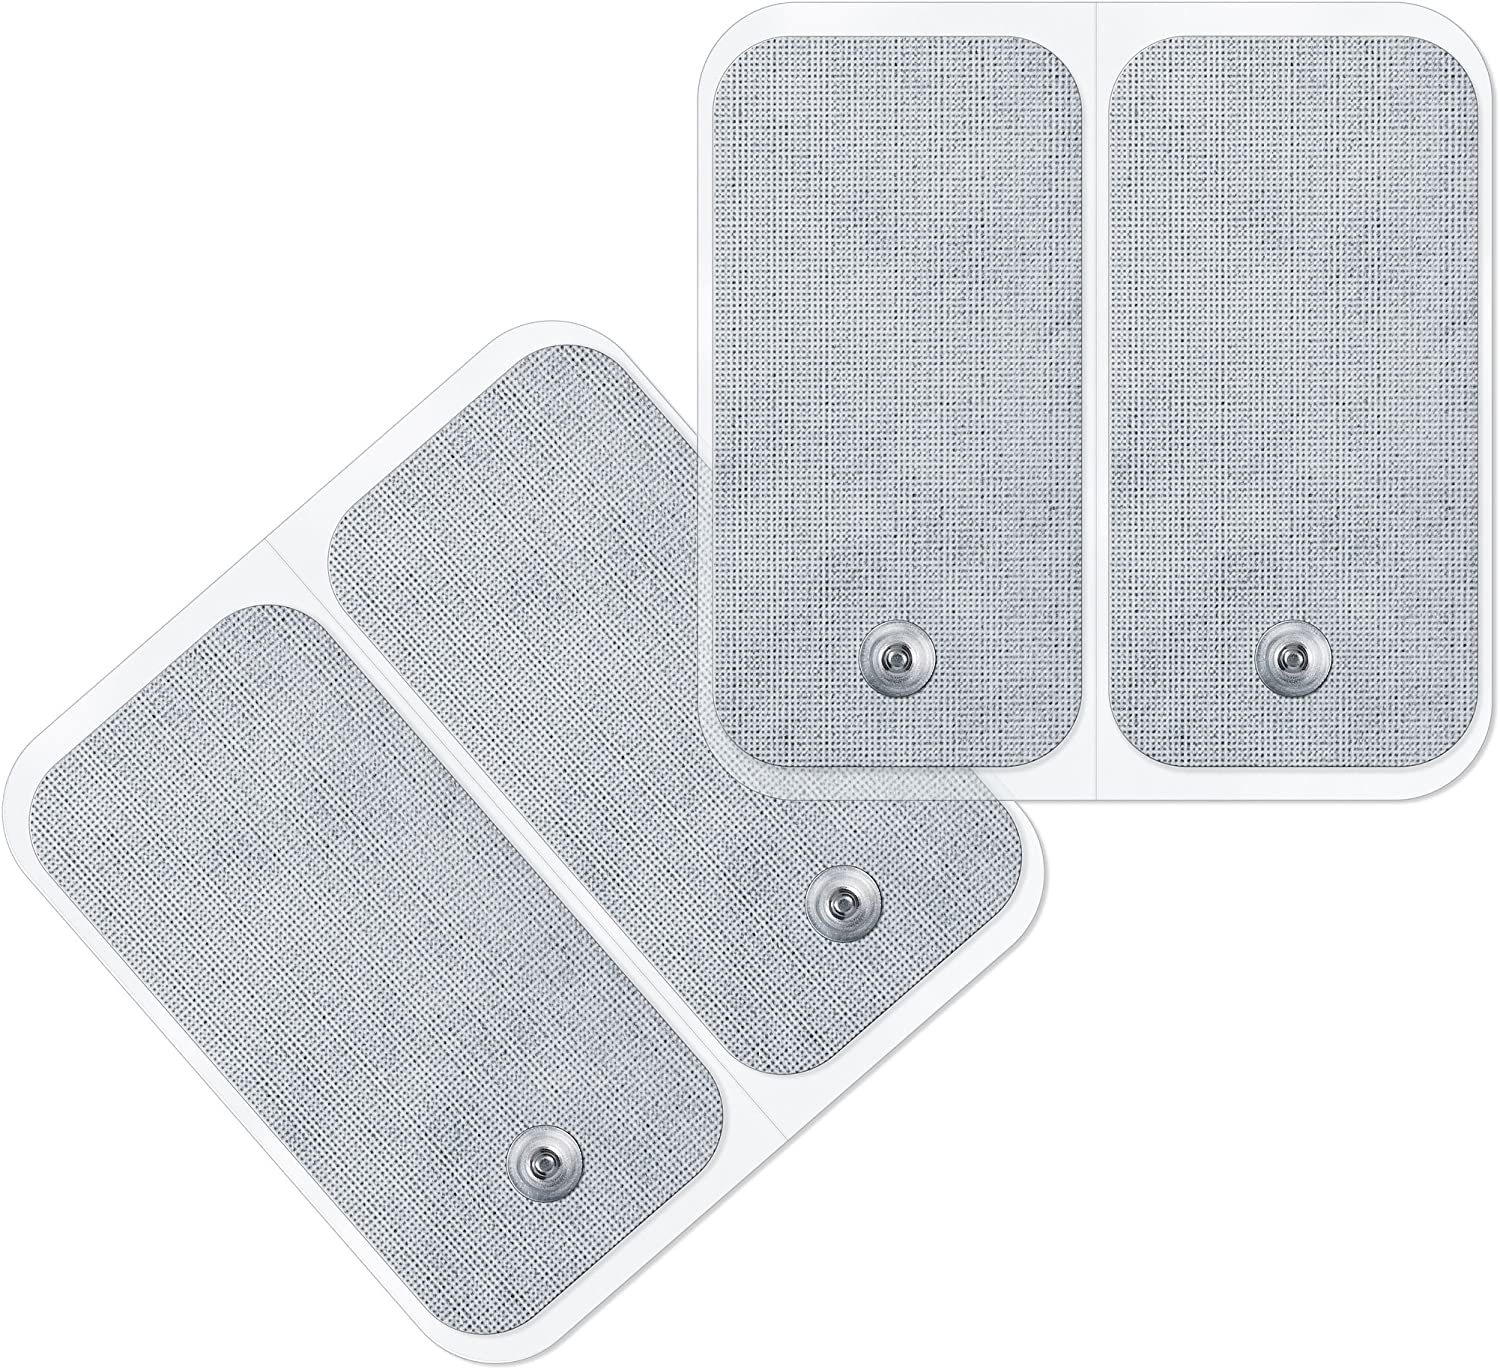 Beurer Self-adhesive gel electrode pads (replacement set, 50 x 100 mm, suitable for Beurer EMS/TENS devices) pack of 4